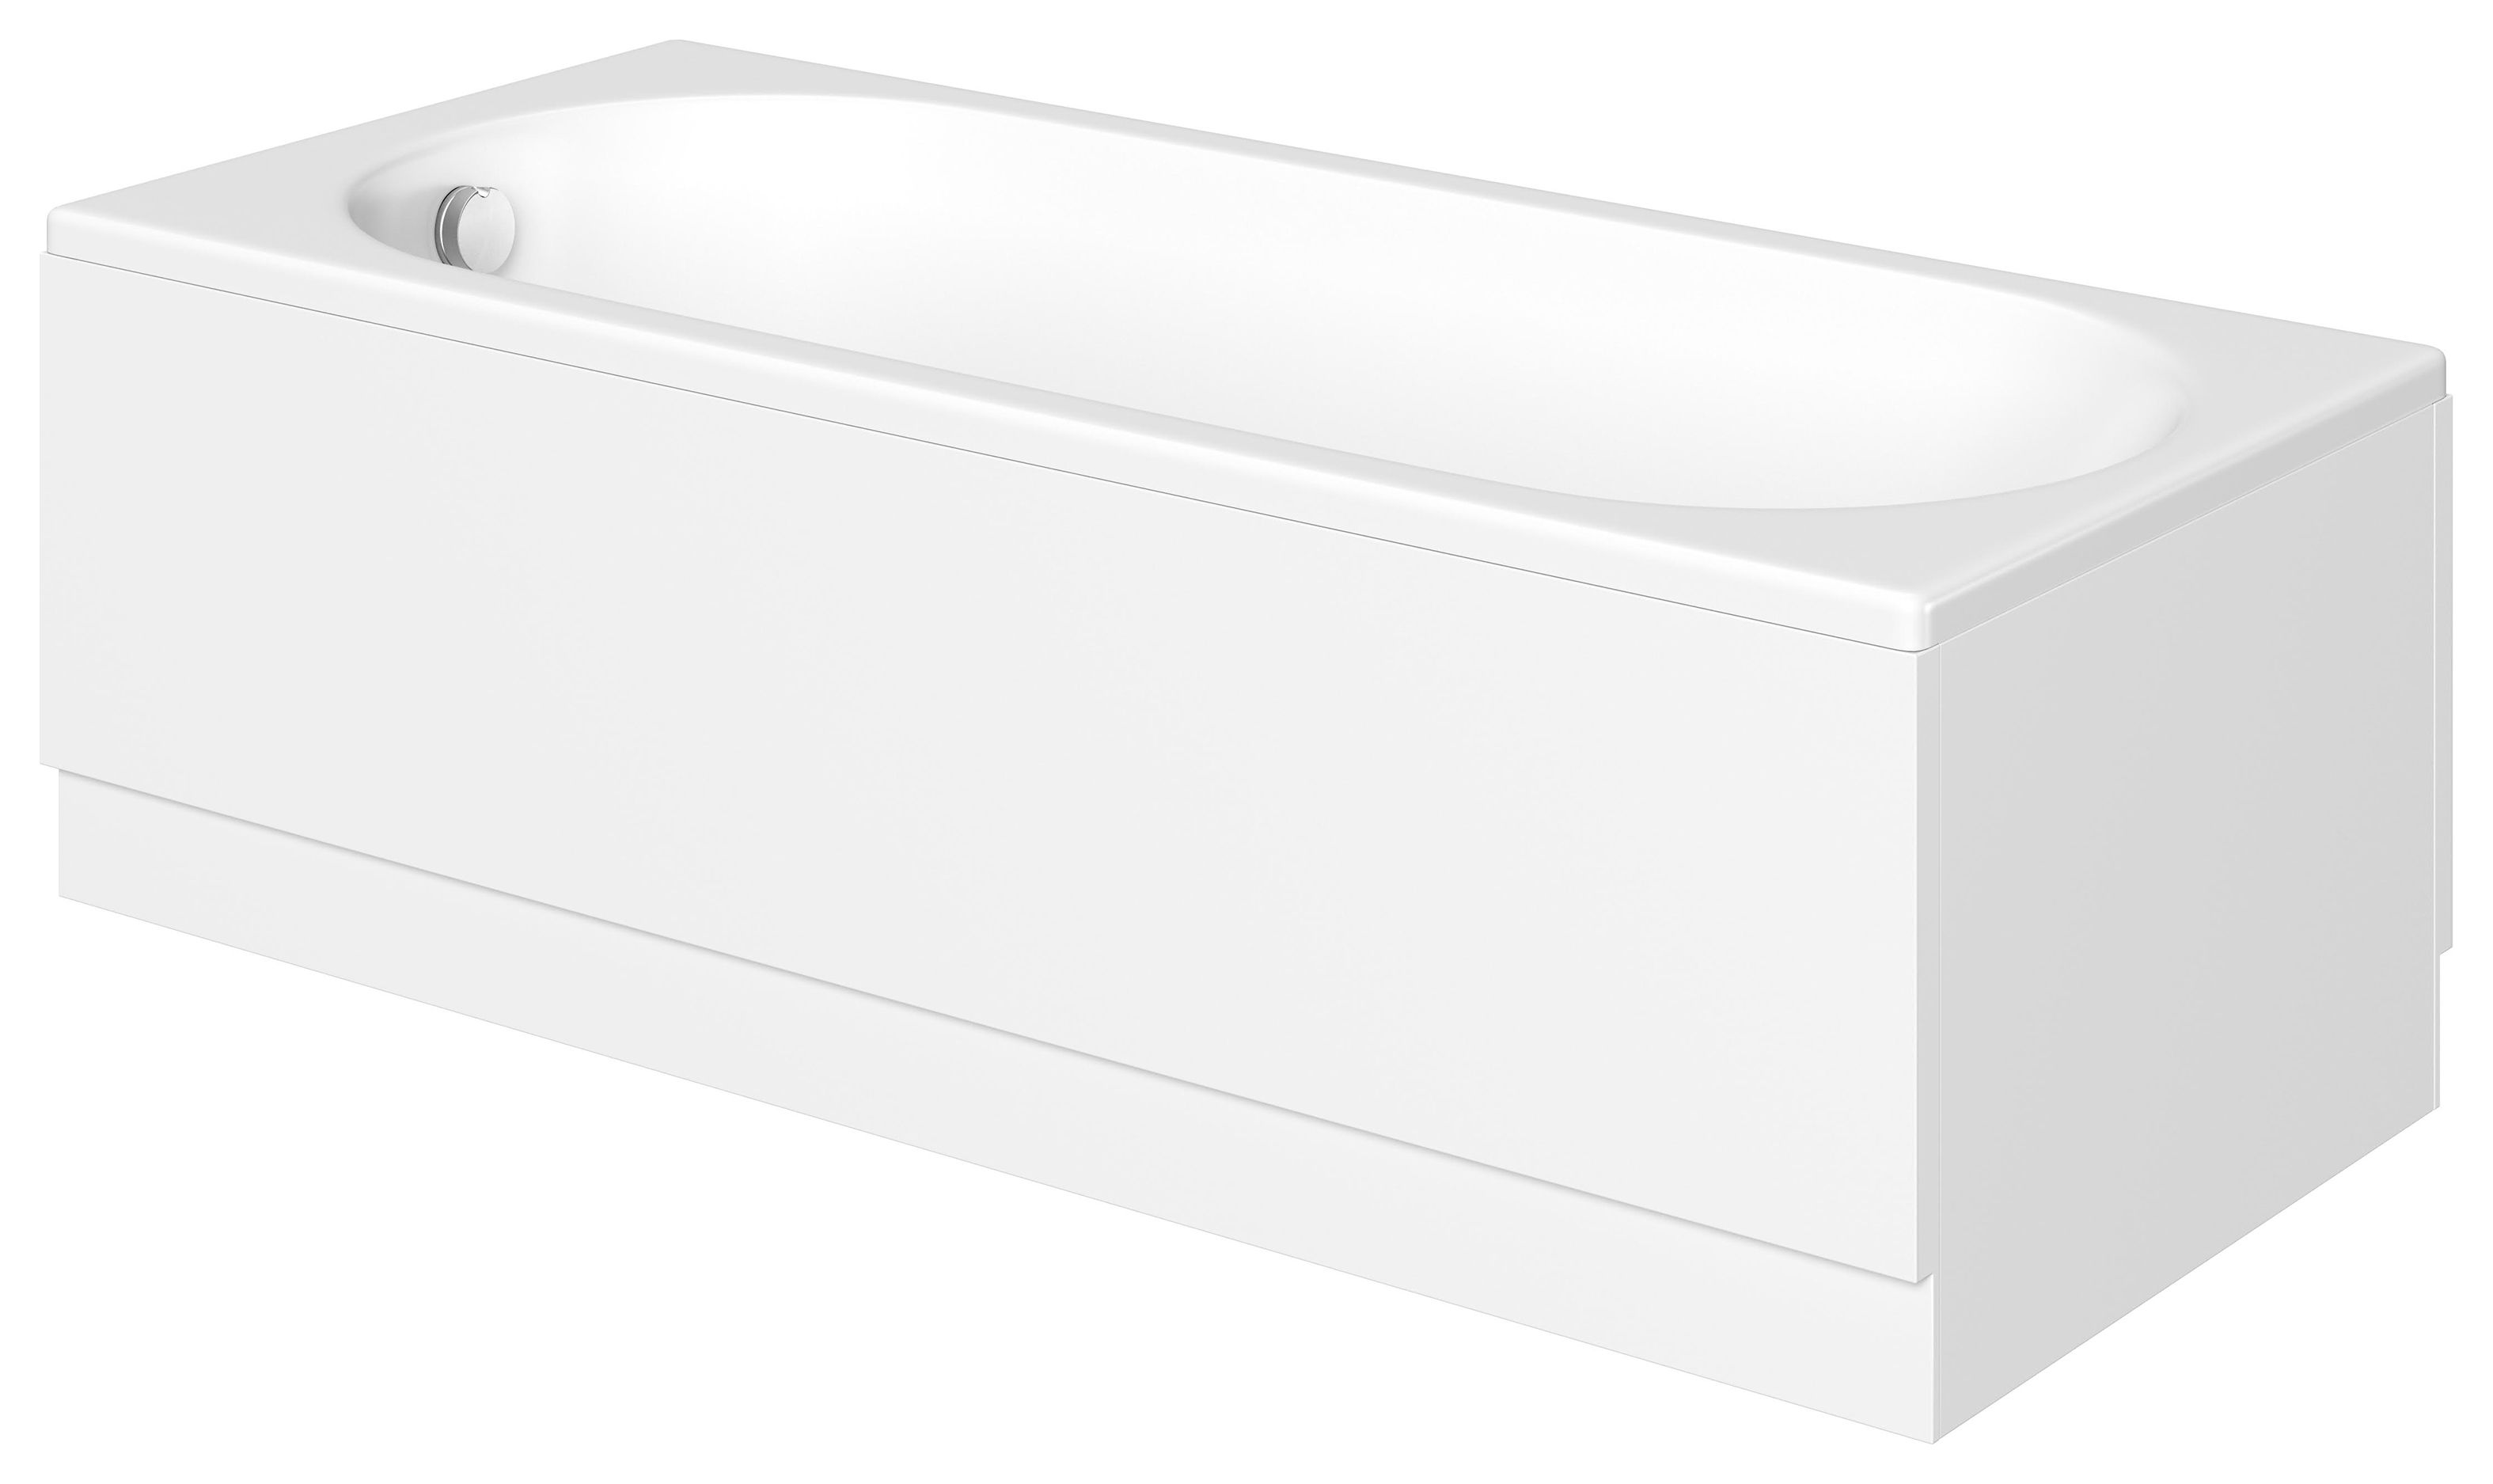 Wickes Forenza Left Hand 14 Jet Double Ended Reinforced LED Light Whirlpool Bath - 1700 x 750mm